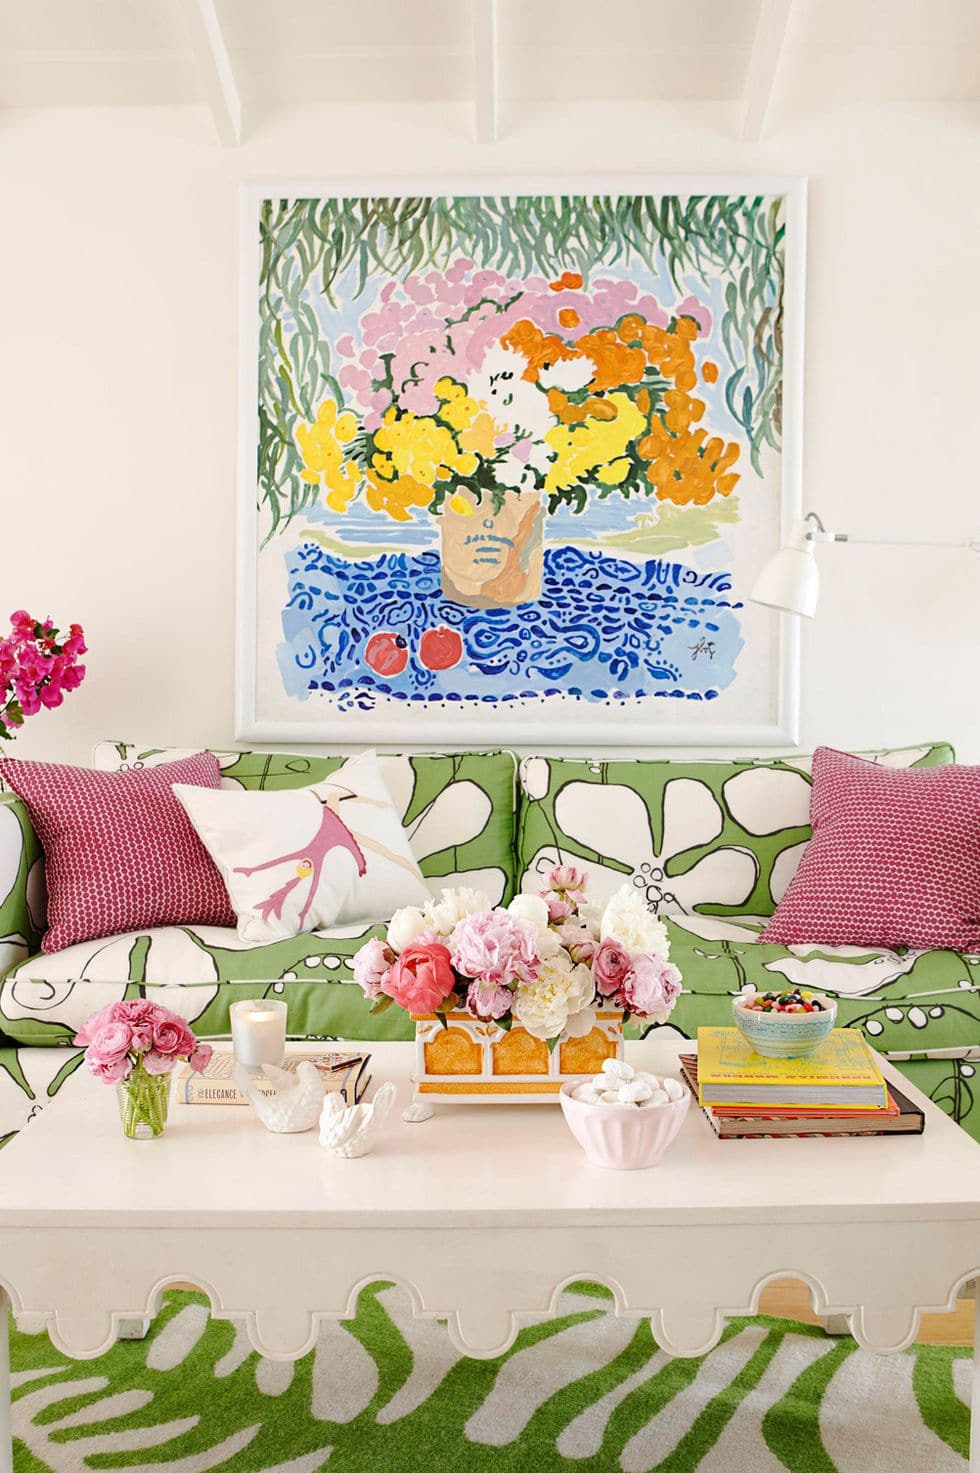 Large floral painting above a modern green couch with pink and mauve pillows featured in summer decor ideas